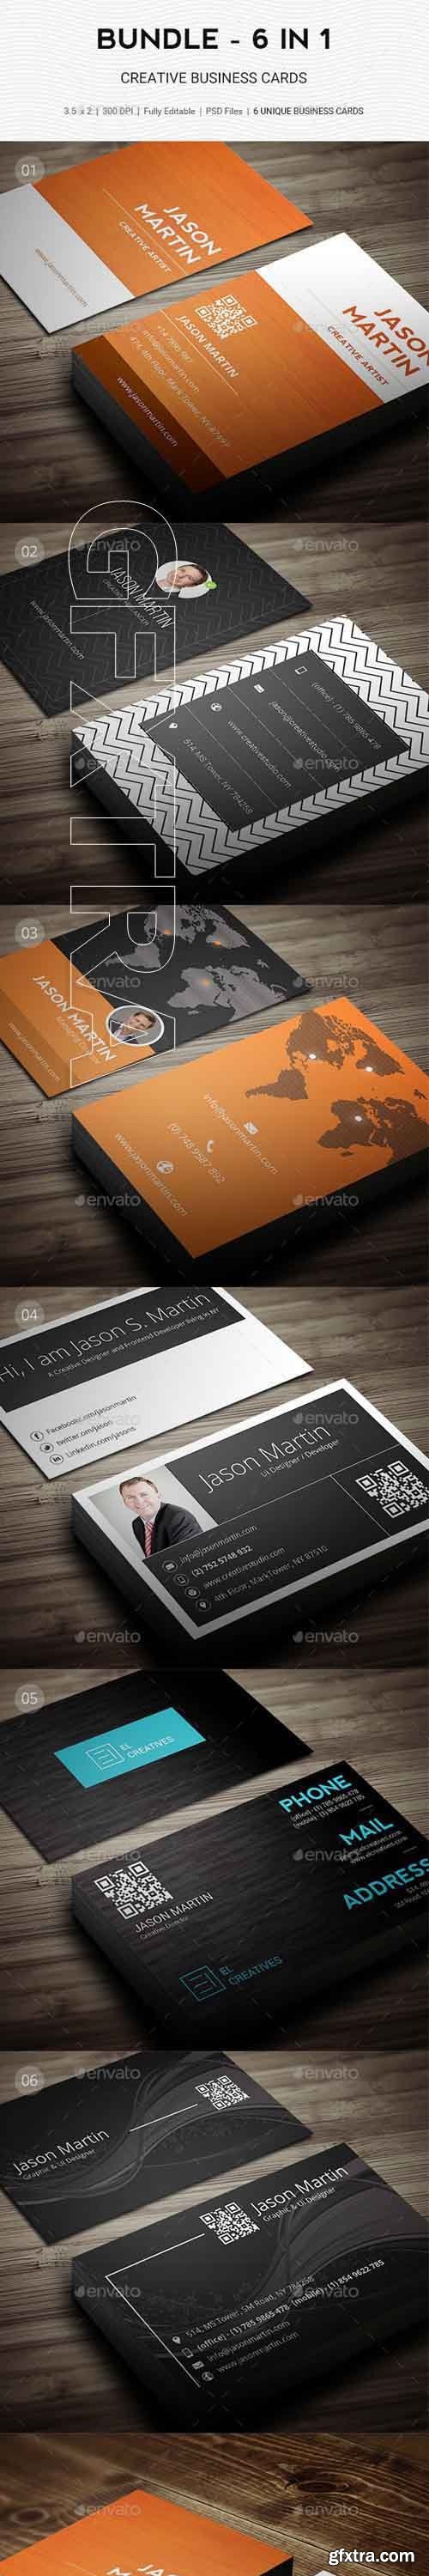 GraphicRiver - Bundle - Pro 6 in 1 - Creative Business Cards - B49 20603469